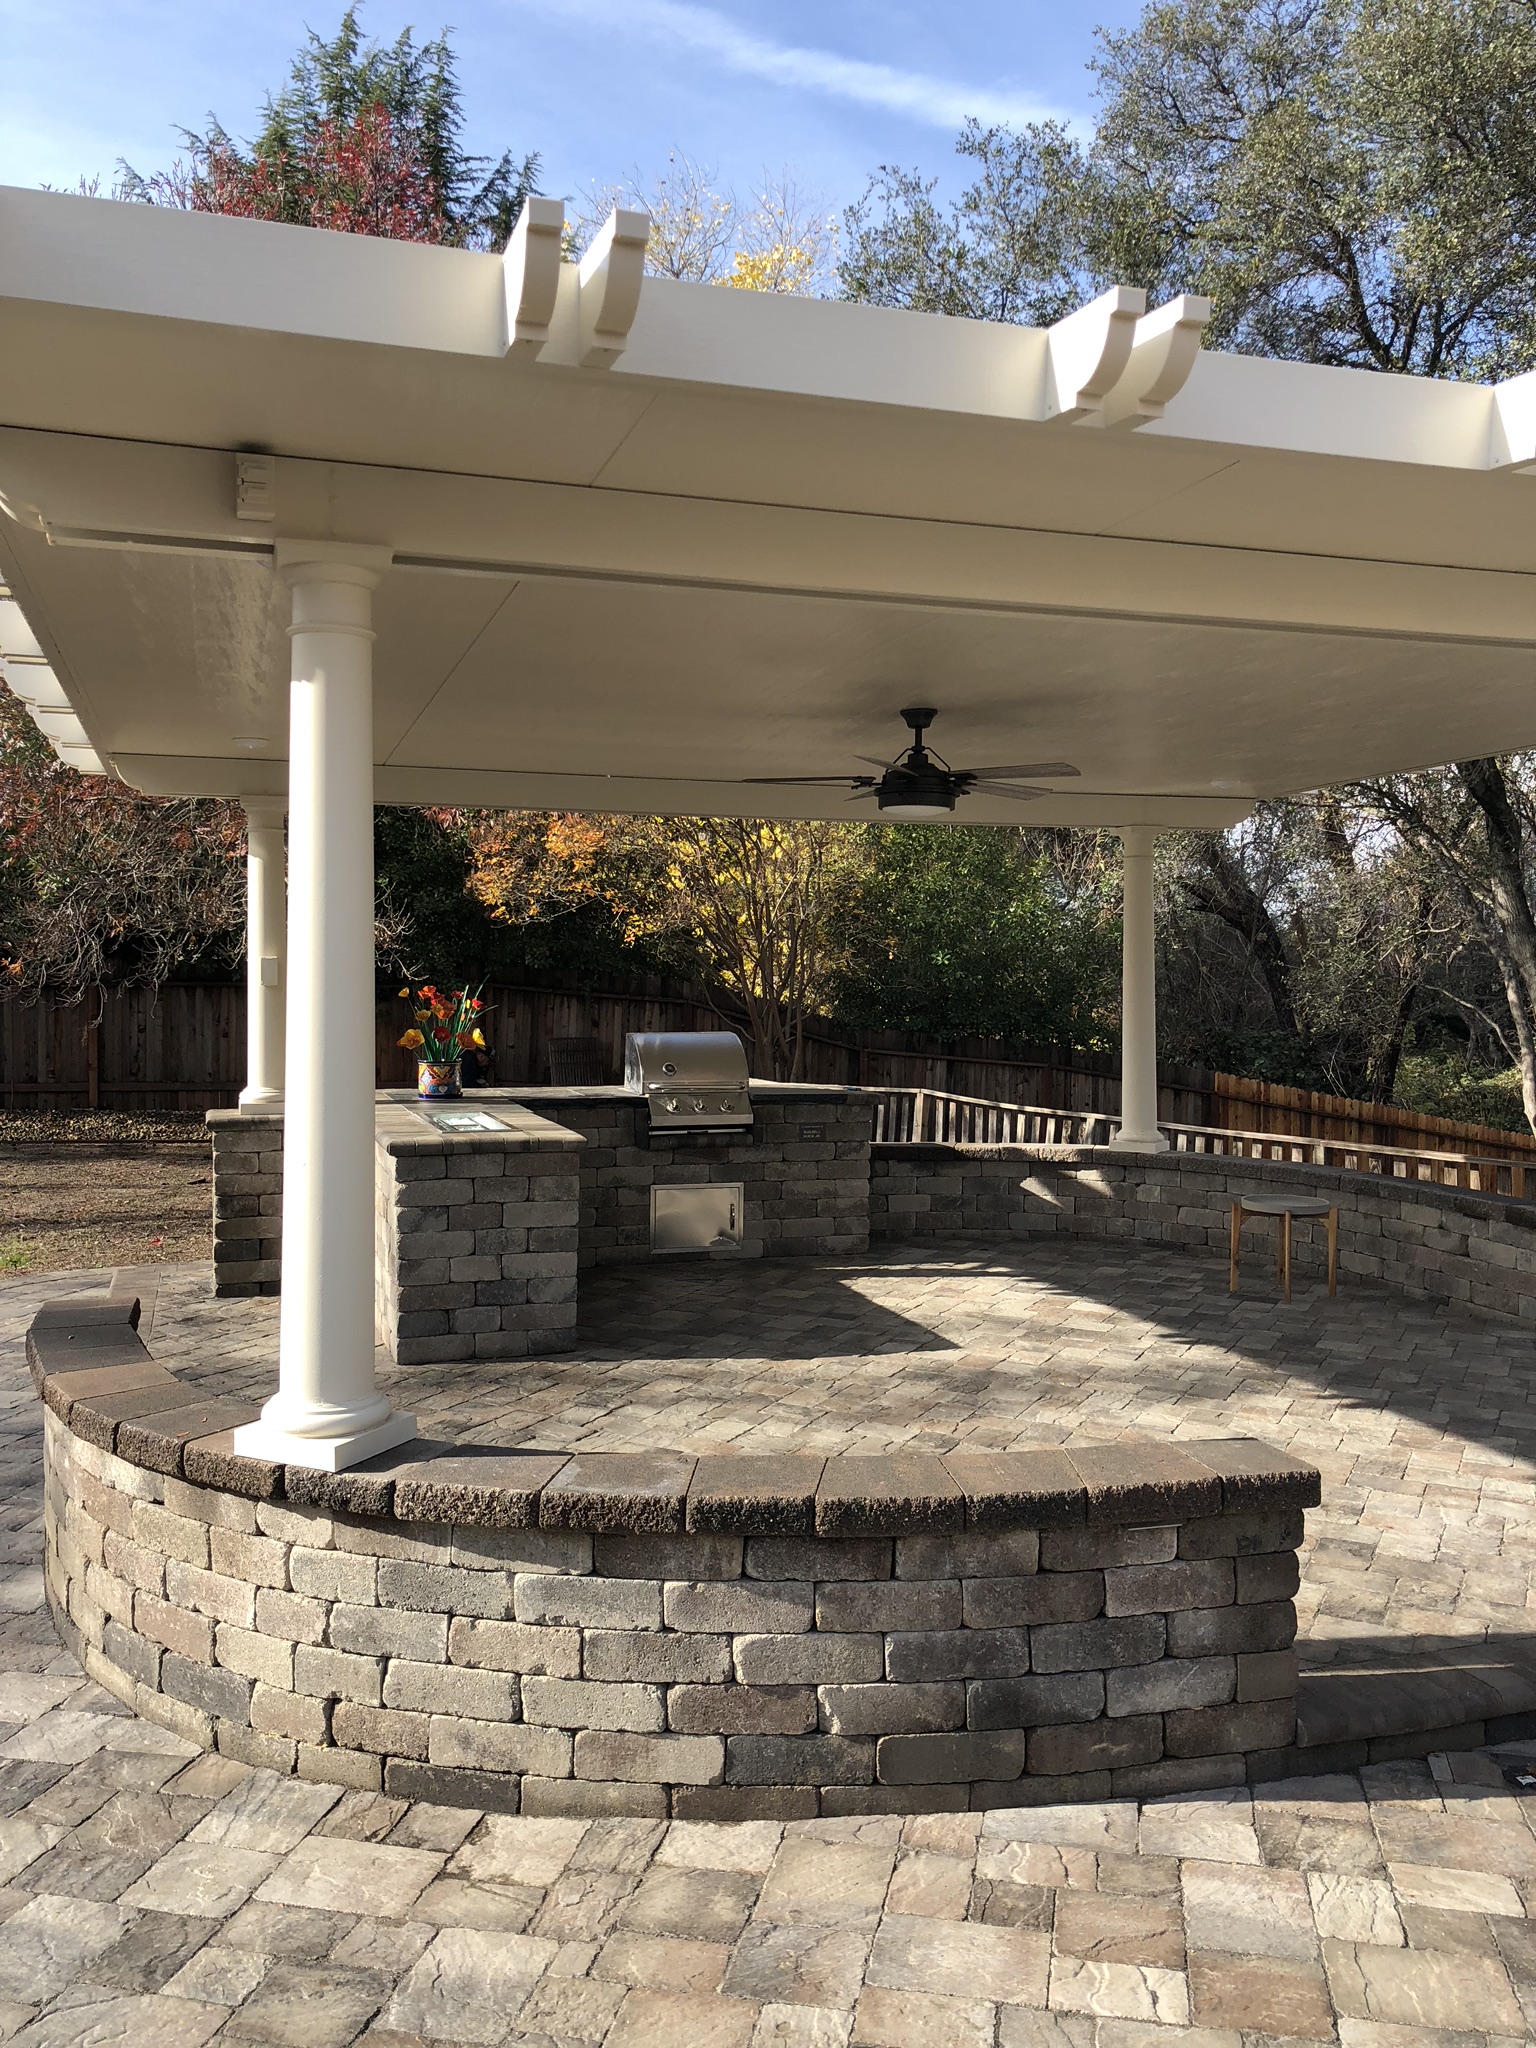 Custom Covered Patio with Pavers & Outdoor Kitchen Space